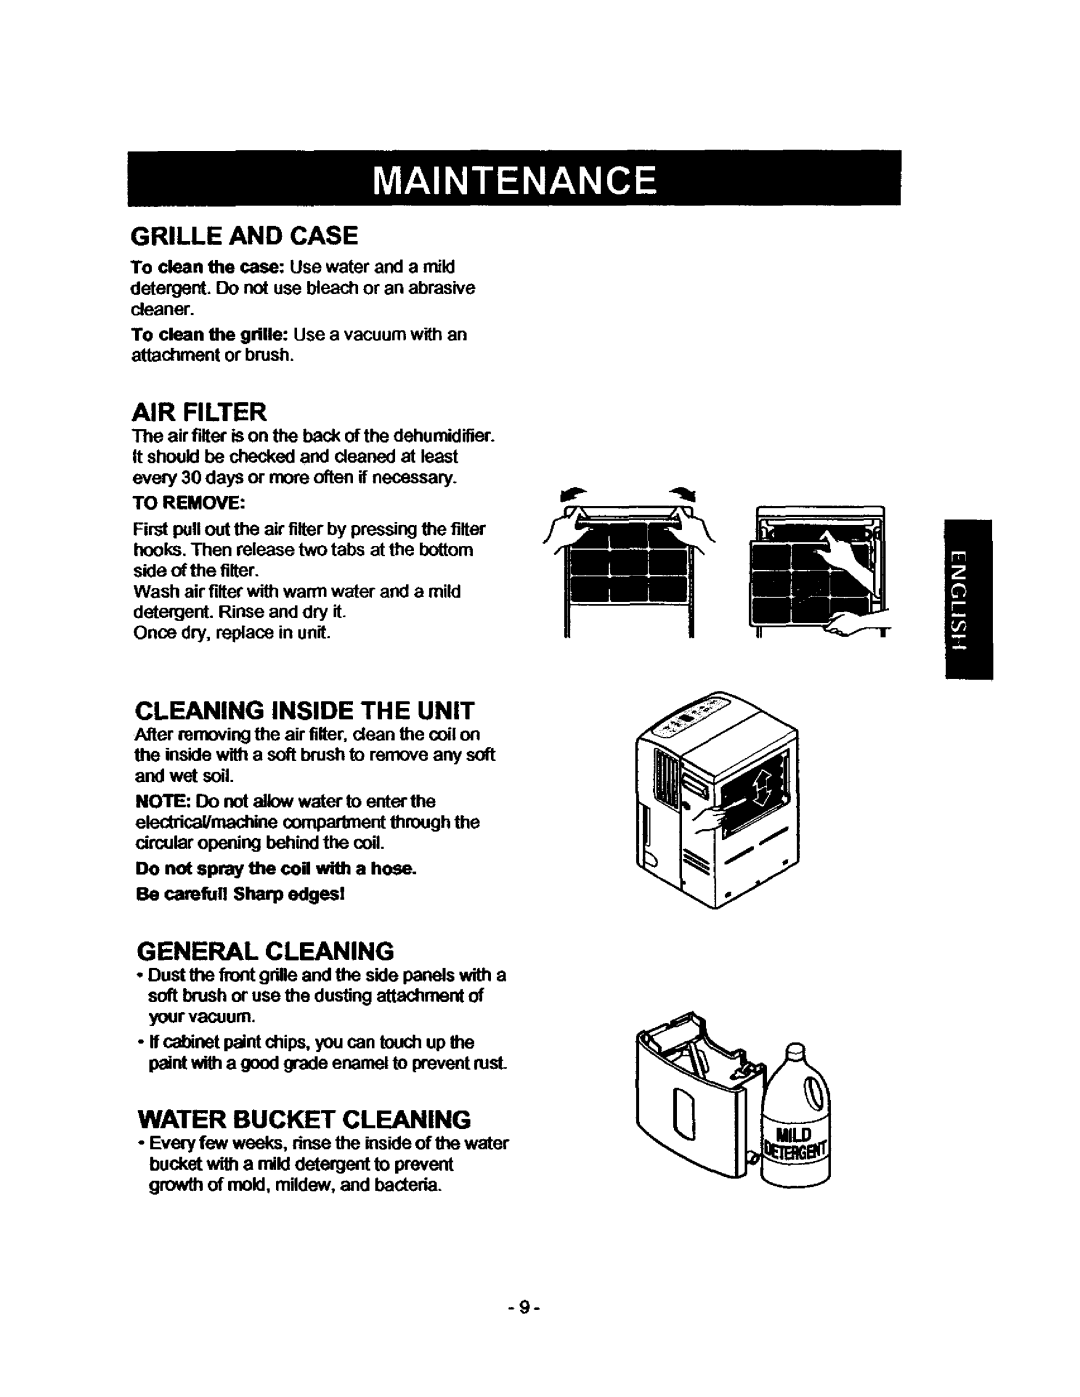 Kenmore 580.53509 Cleaning Inside The Unit, General Cleaning, Grille And Case, Air Filter, Water Bucket Cleaning 